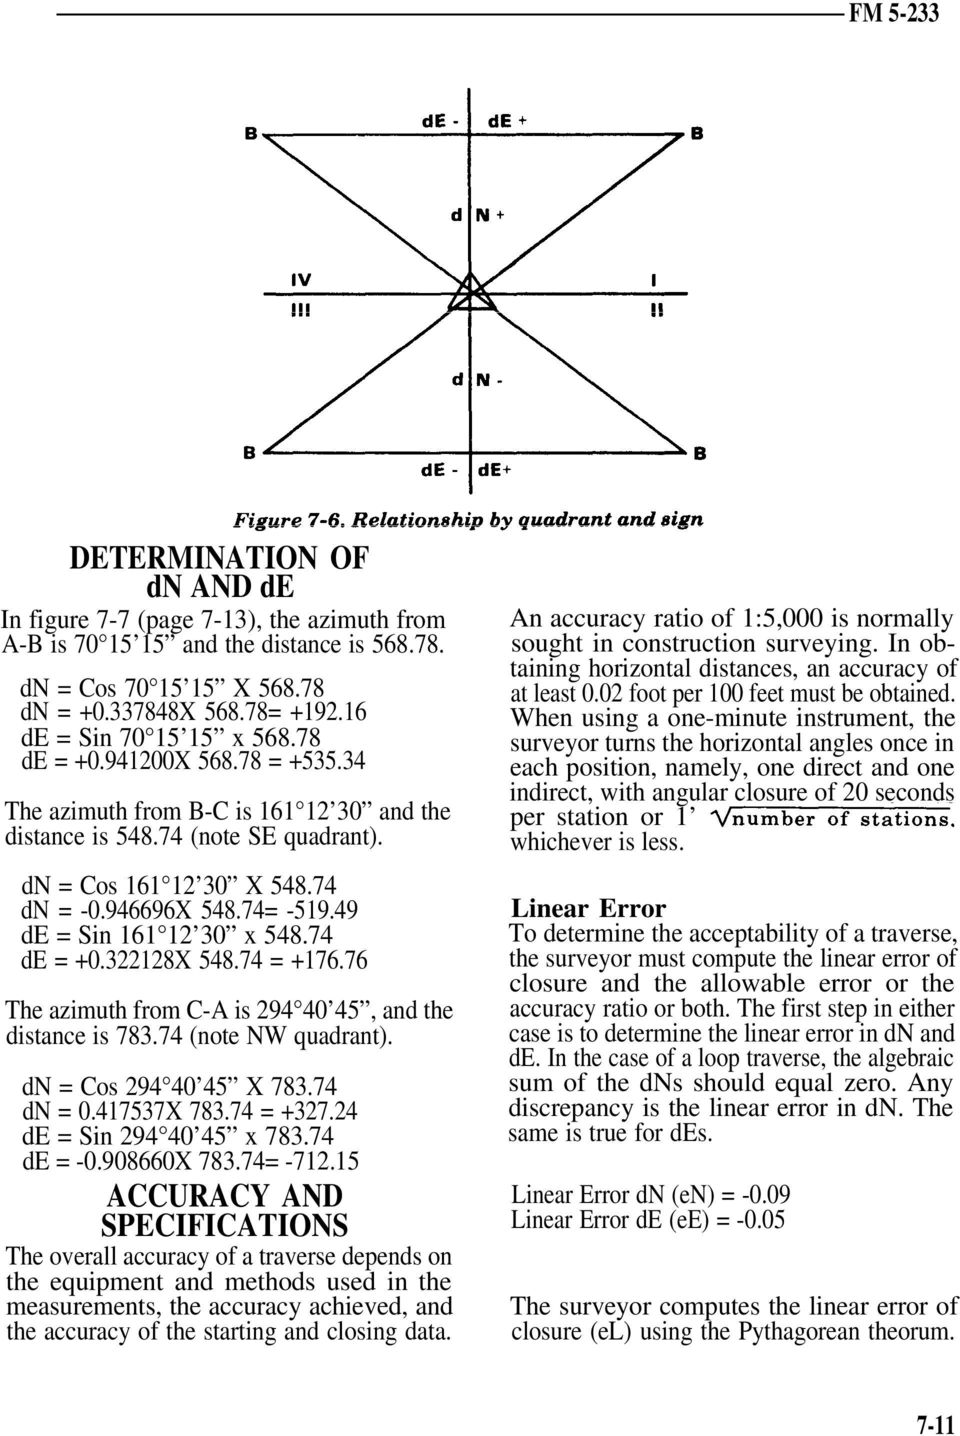 49 de = Sin 161 12 30 x 548.74 de = +0.322128X 548.74 = +176.76 The azimuth from C-A is 294 40 45, and the distance is 783.74 (note NW quadrant). dn = Cos 294 40 45 X 783.74 dn = 0.417537X 783.